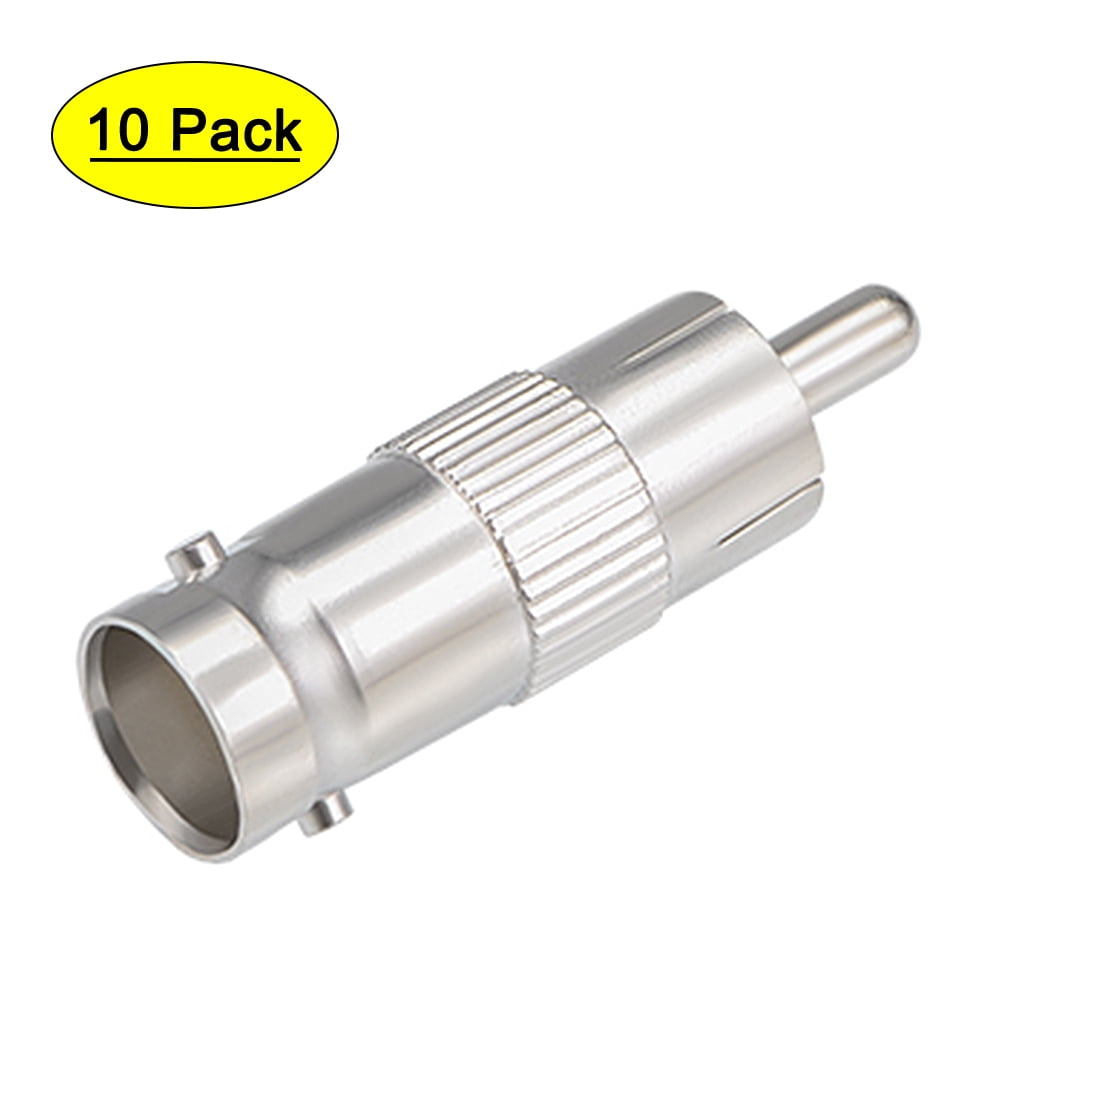 Pack of 10 InstallerCCTV BNC Male to RCA Female Connectors 